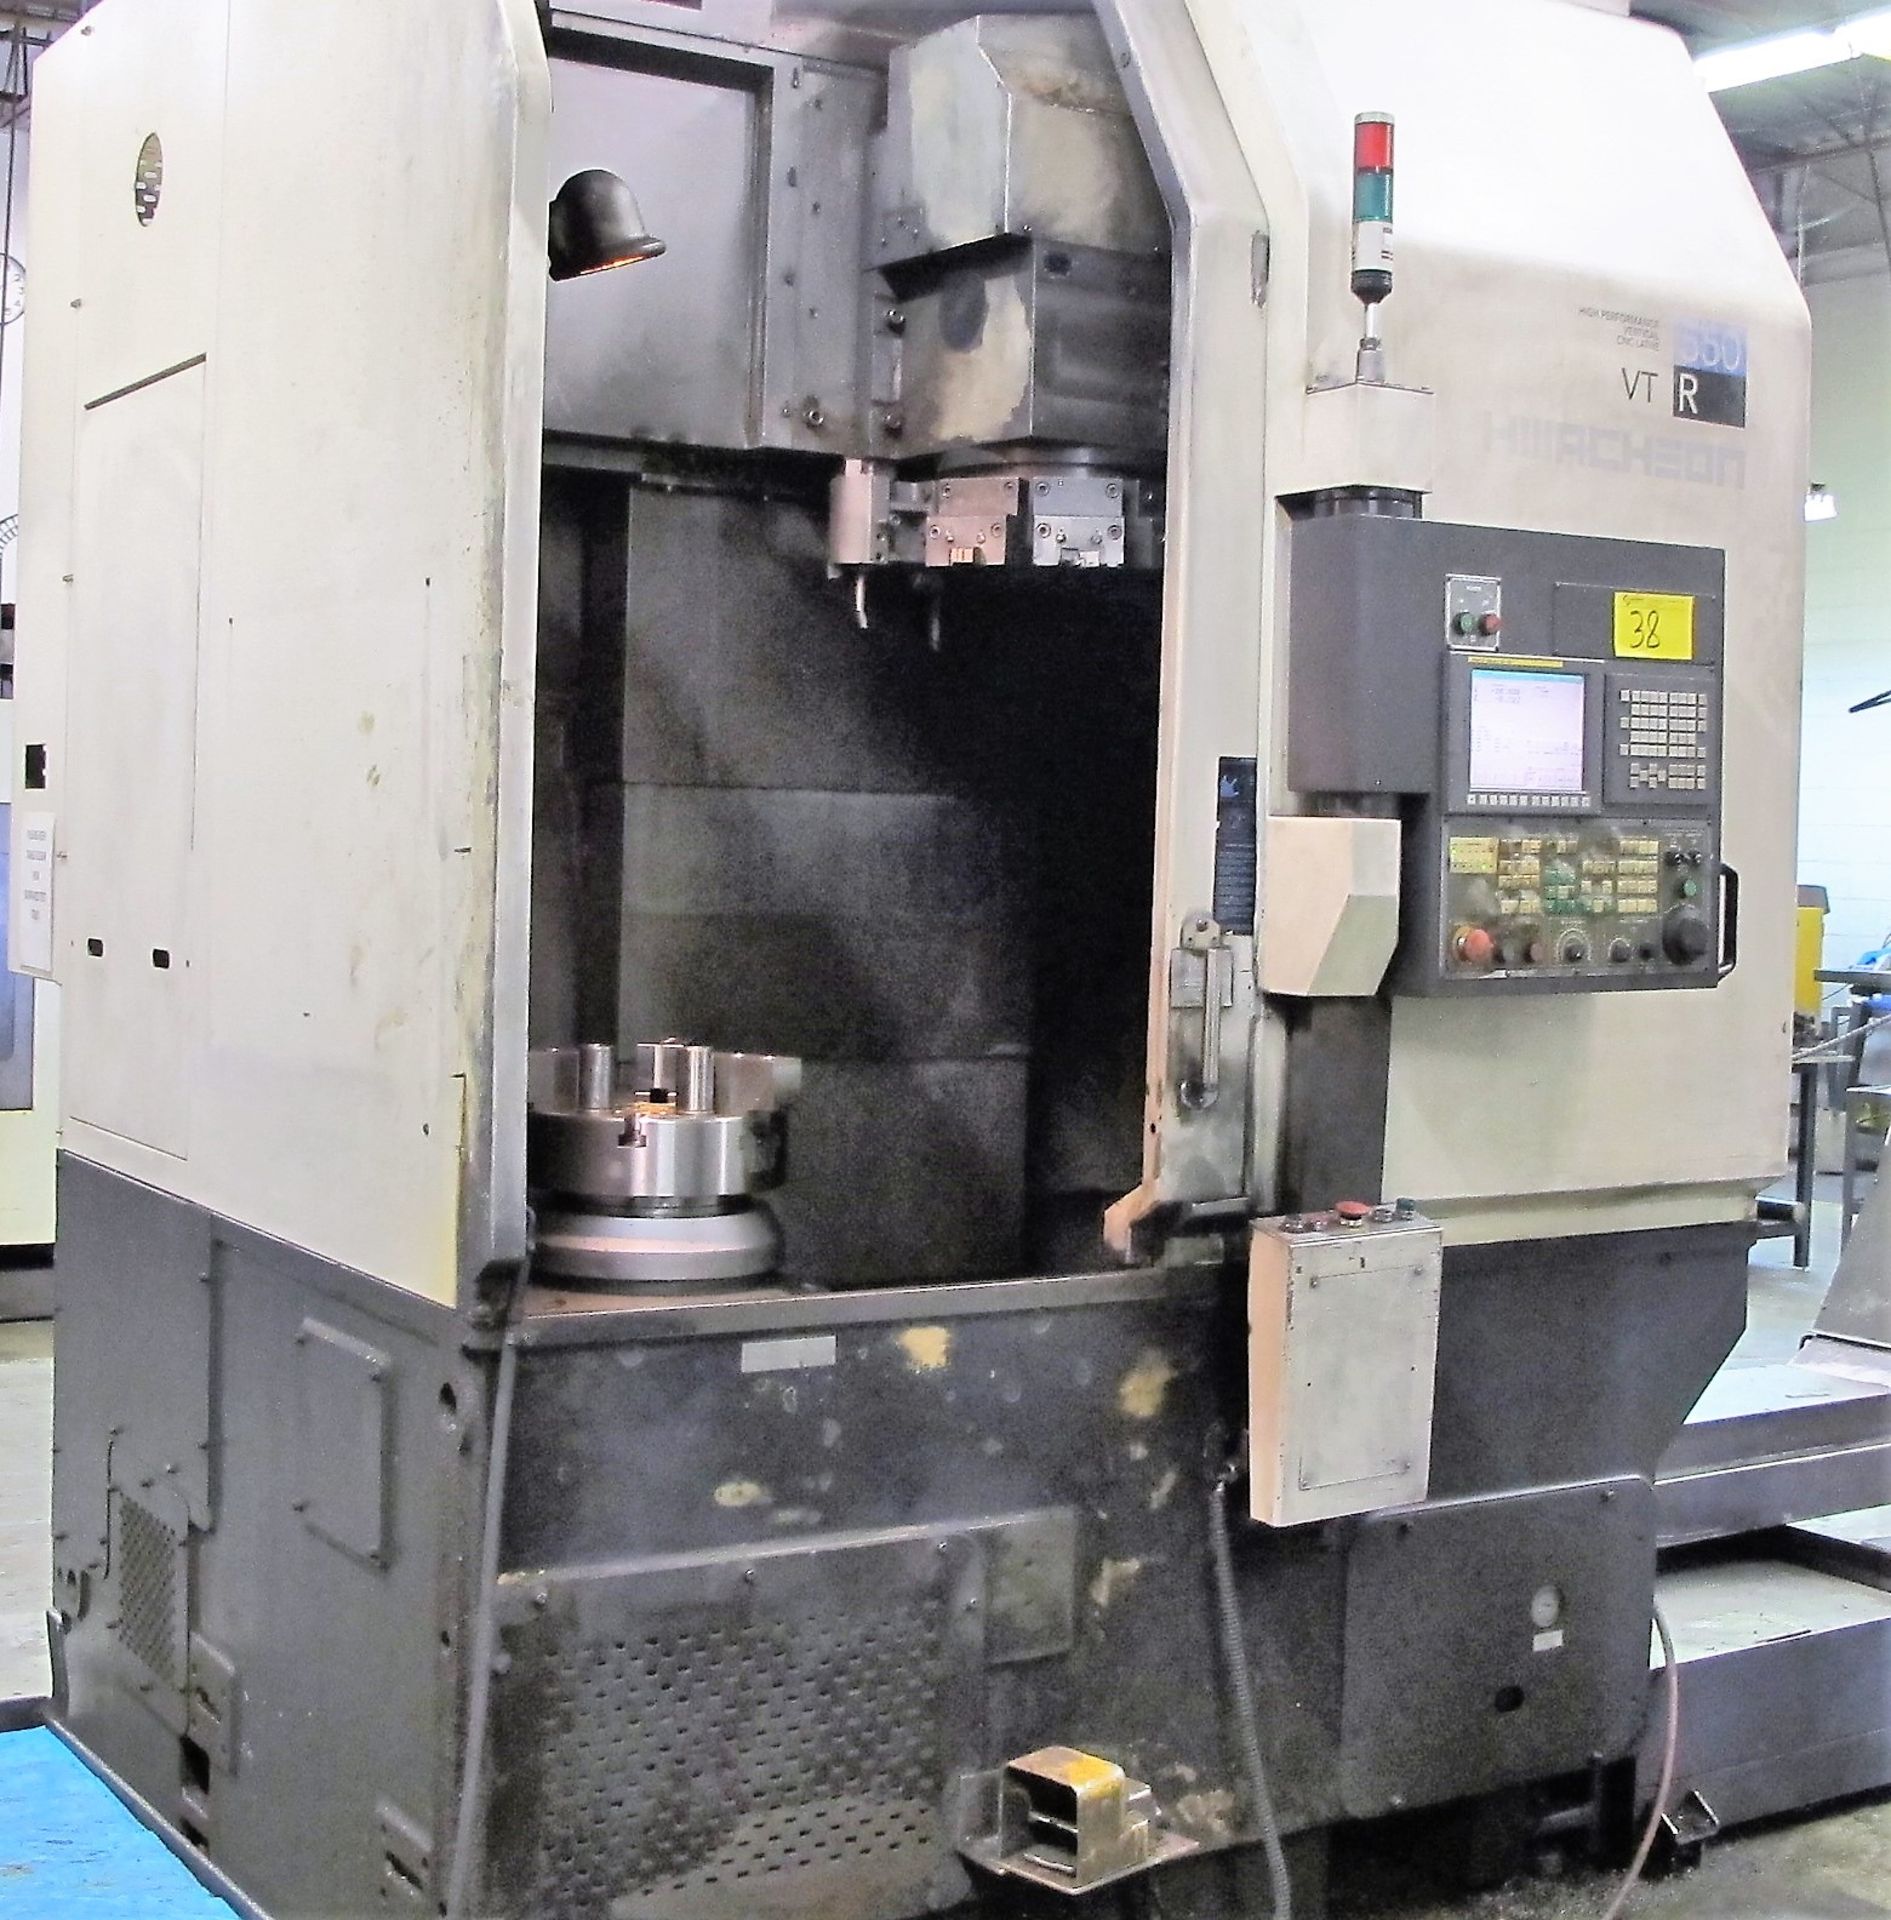 2009 HWACHEON VT-550 R CNC Vertical Turning Center with Fanuc Series Oi-TC CNC Control, 15” Chuck,